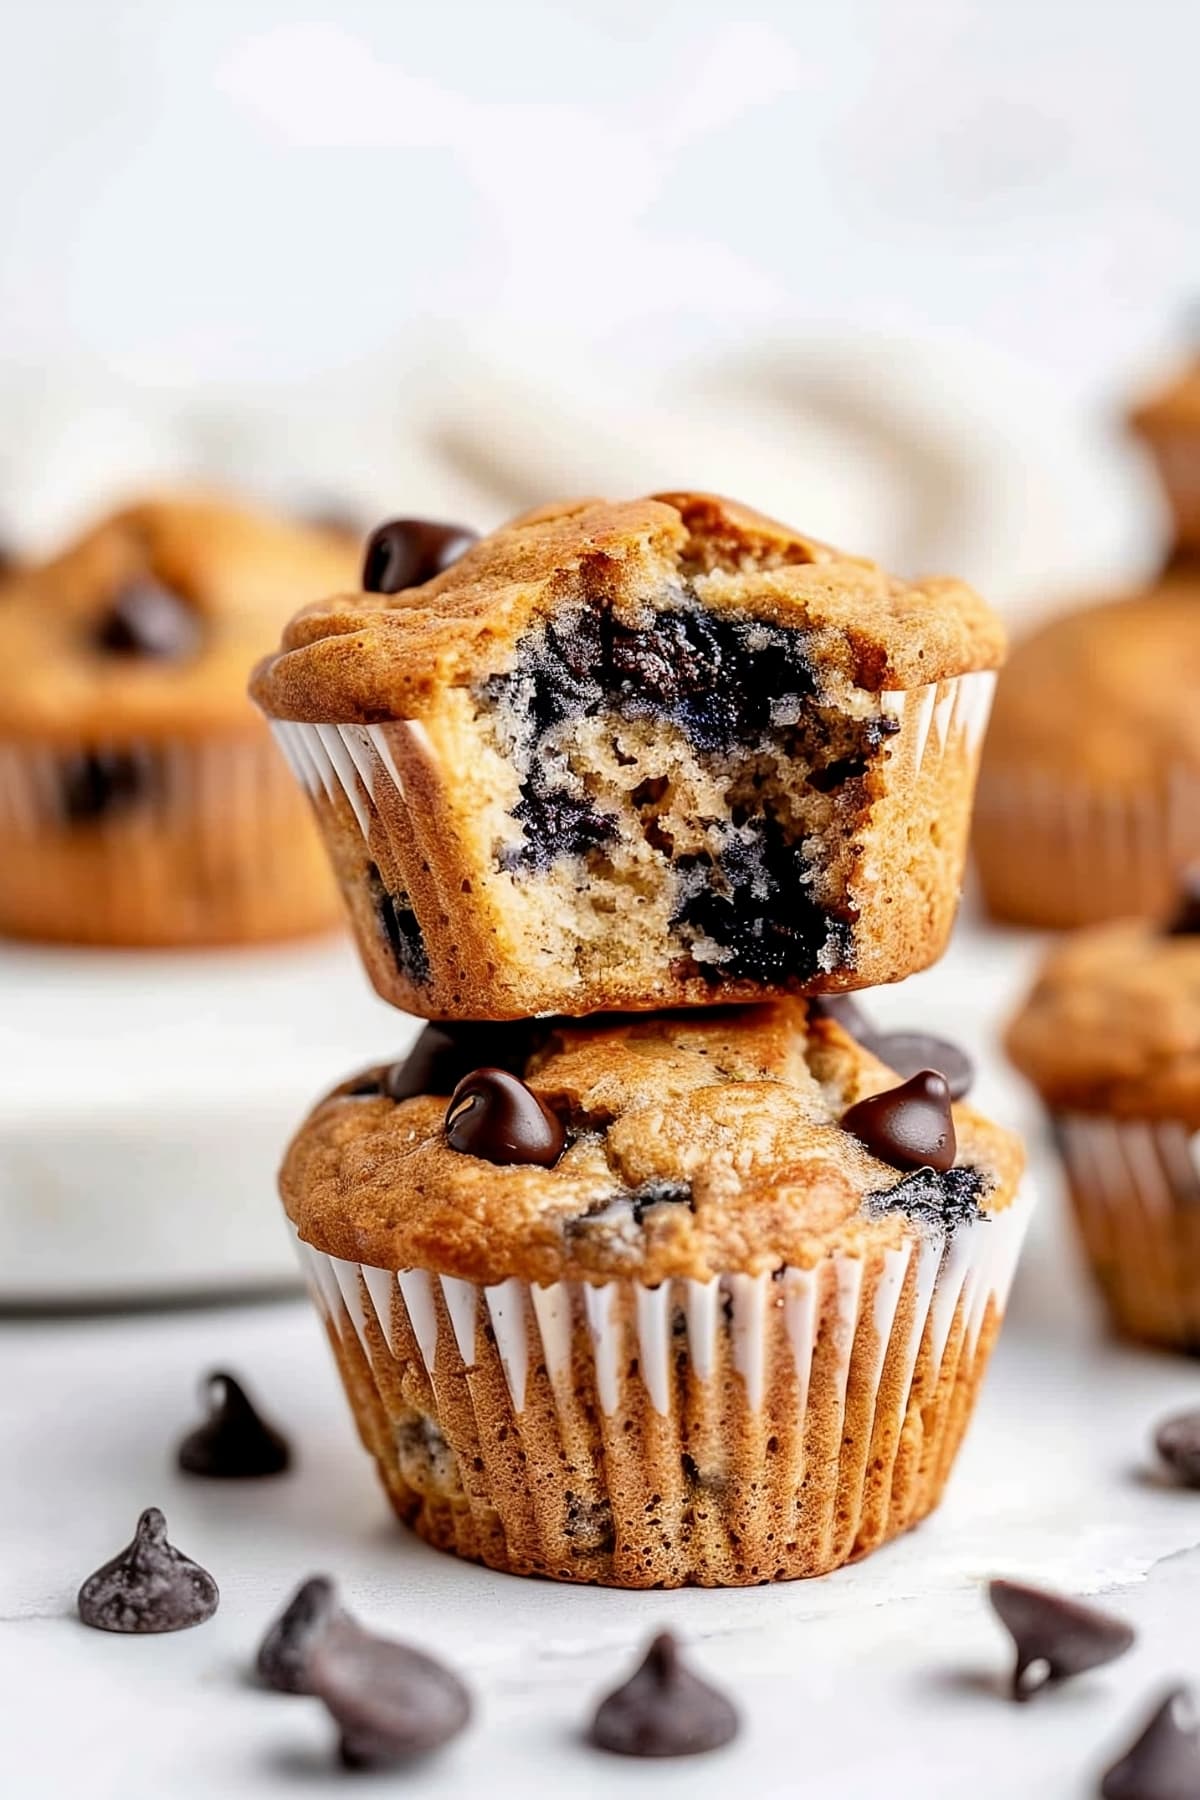 Stacked of homemade kodiak muffins with chocolate chips and blueberries